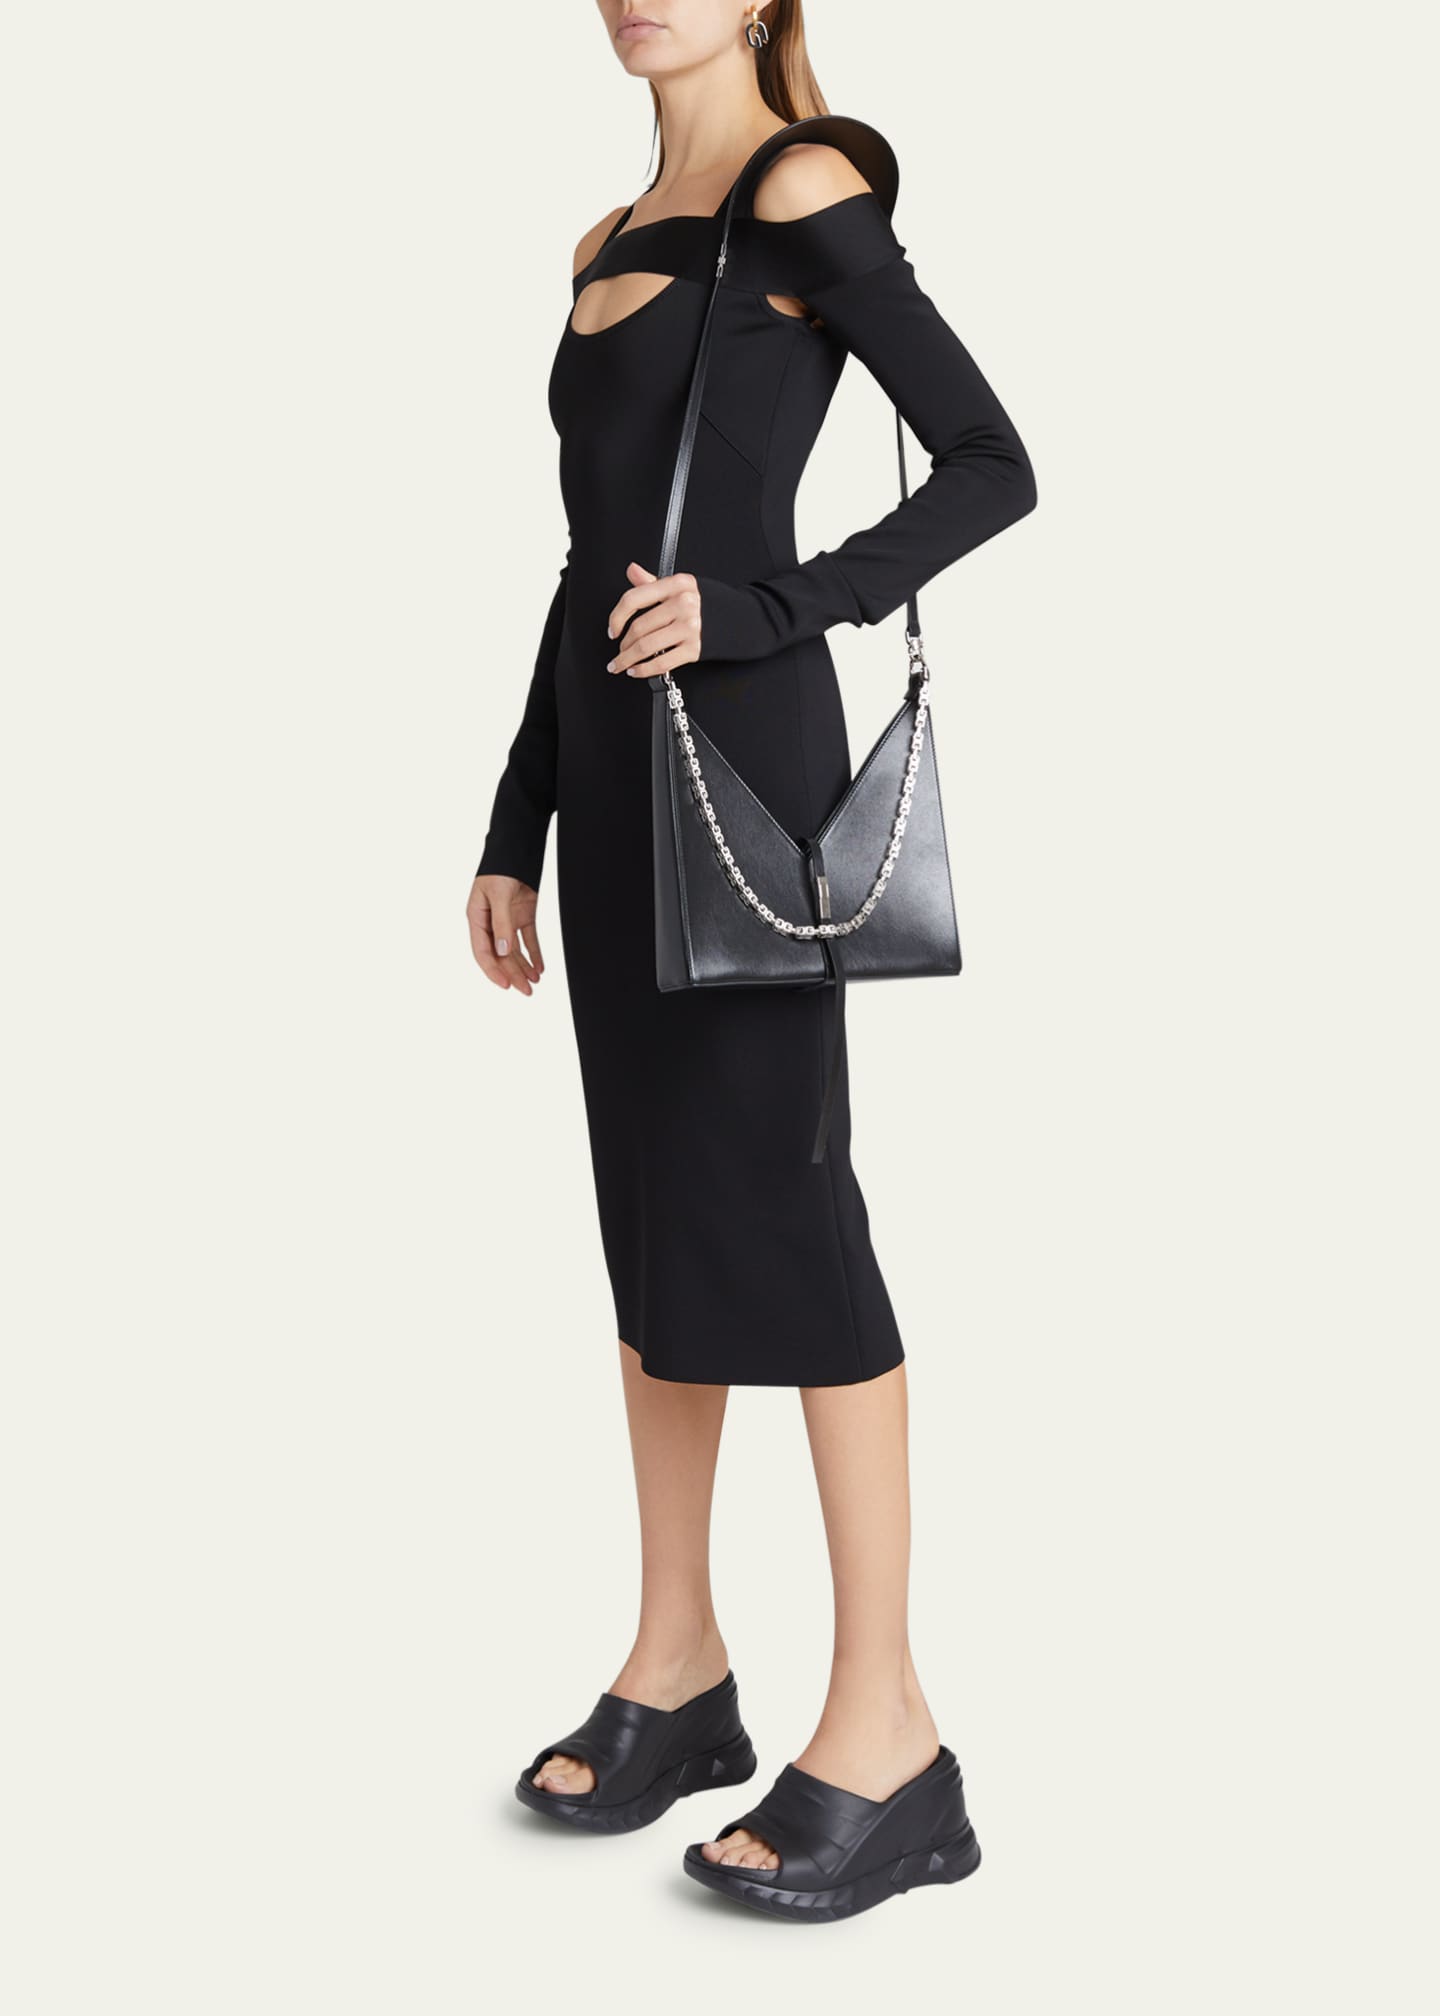 Givenchy Givenchy Women's Black Leather Shoulder Bag - Stylemyle